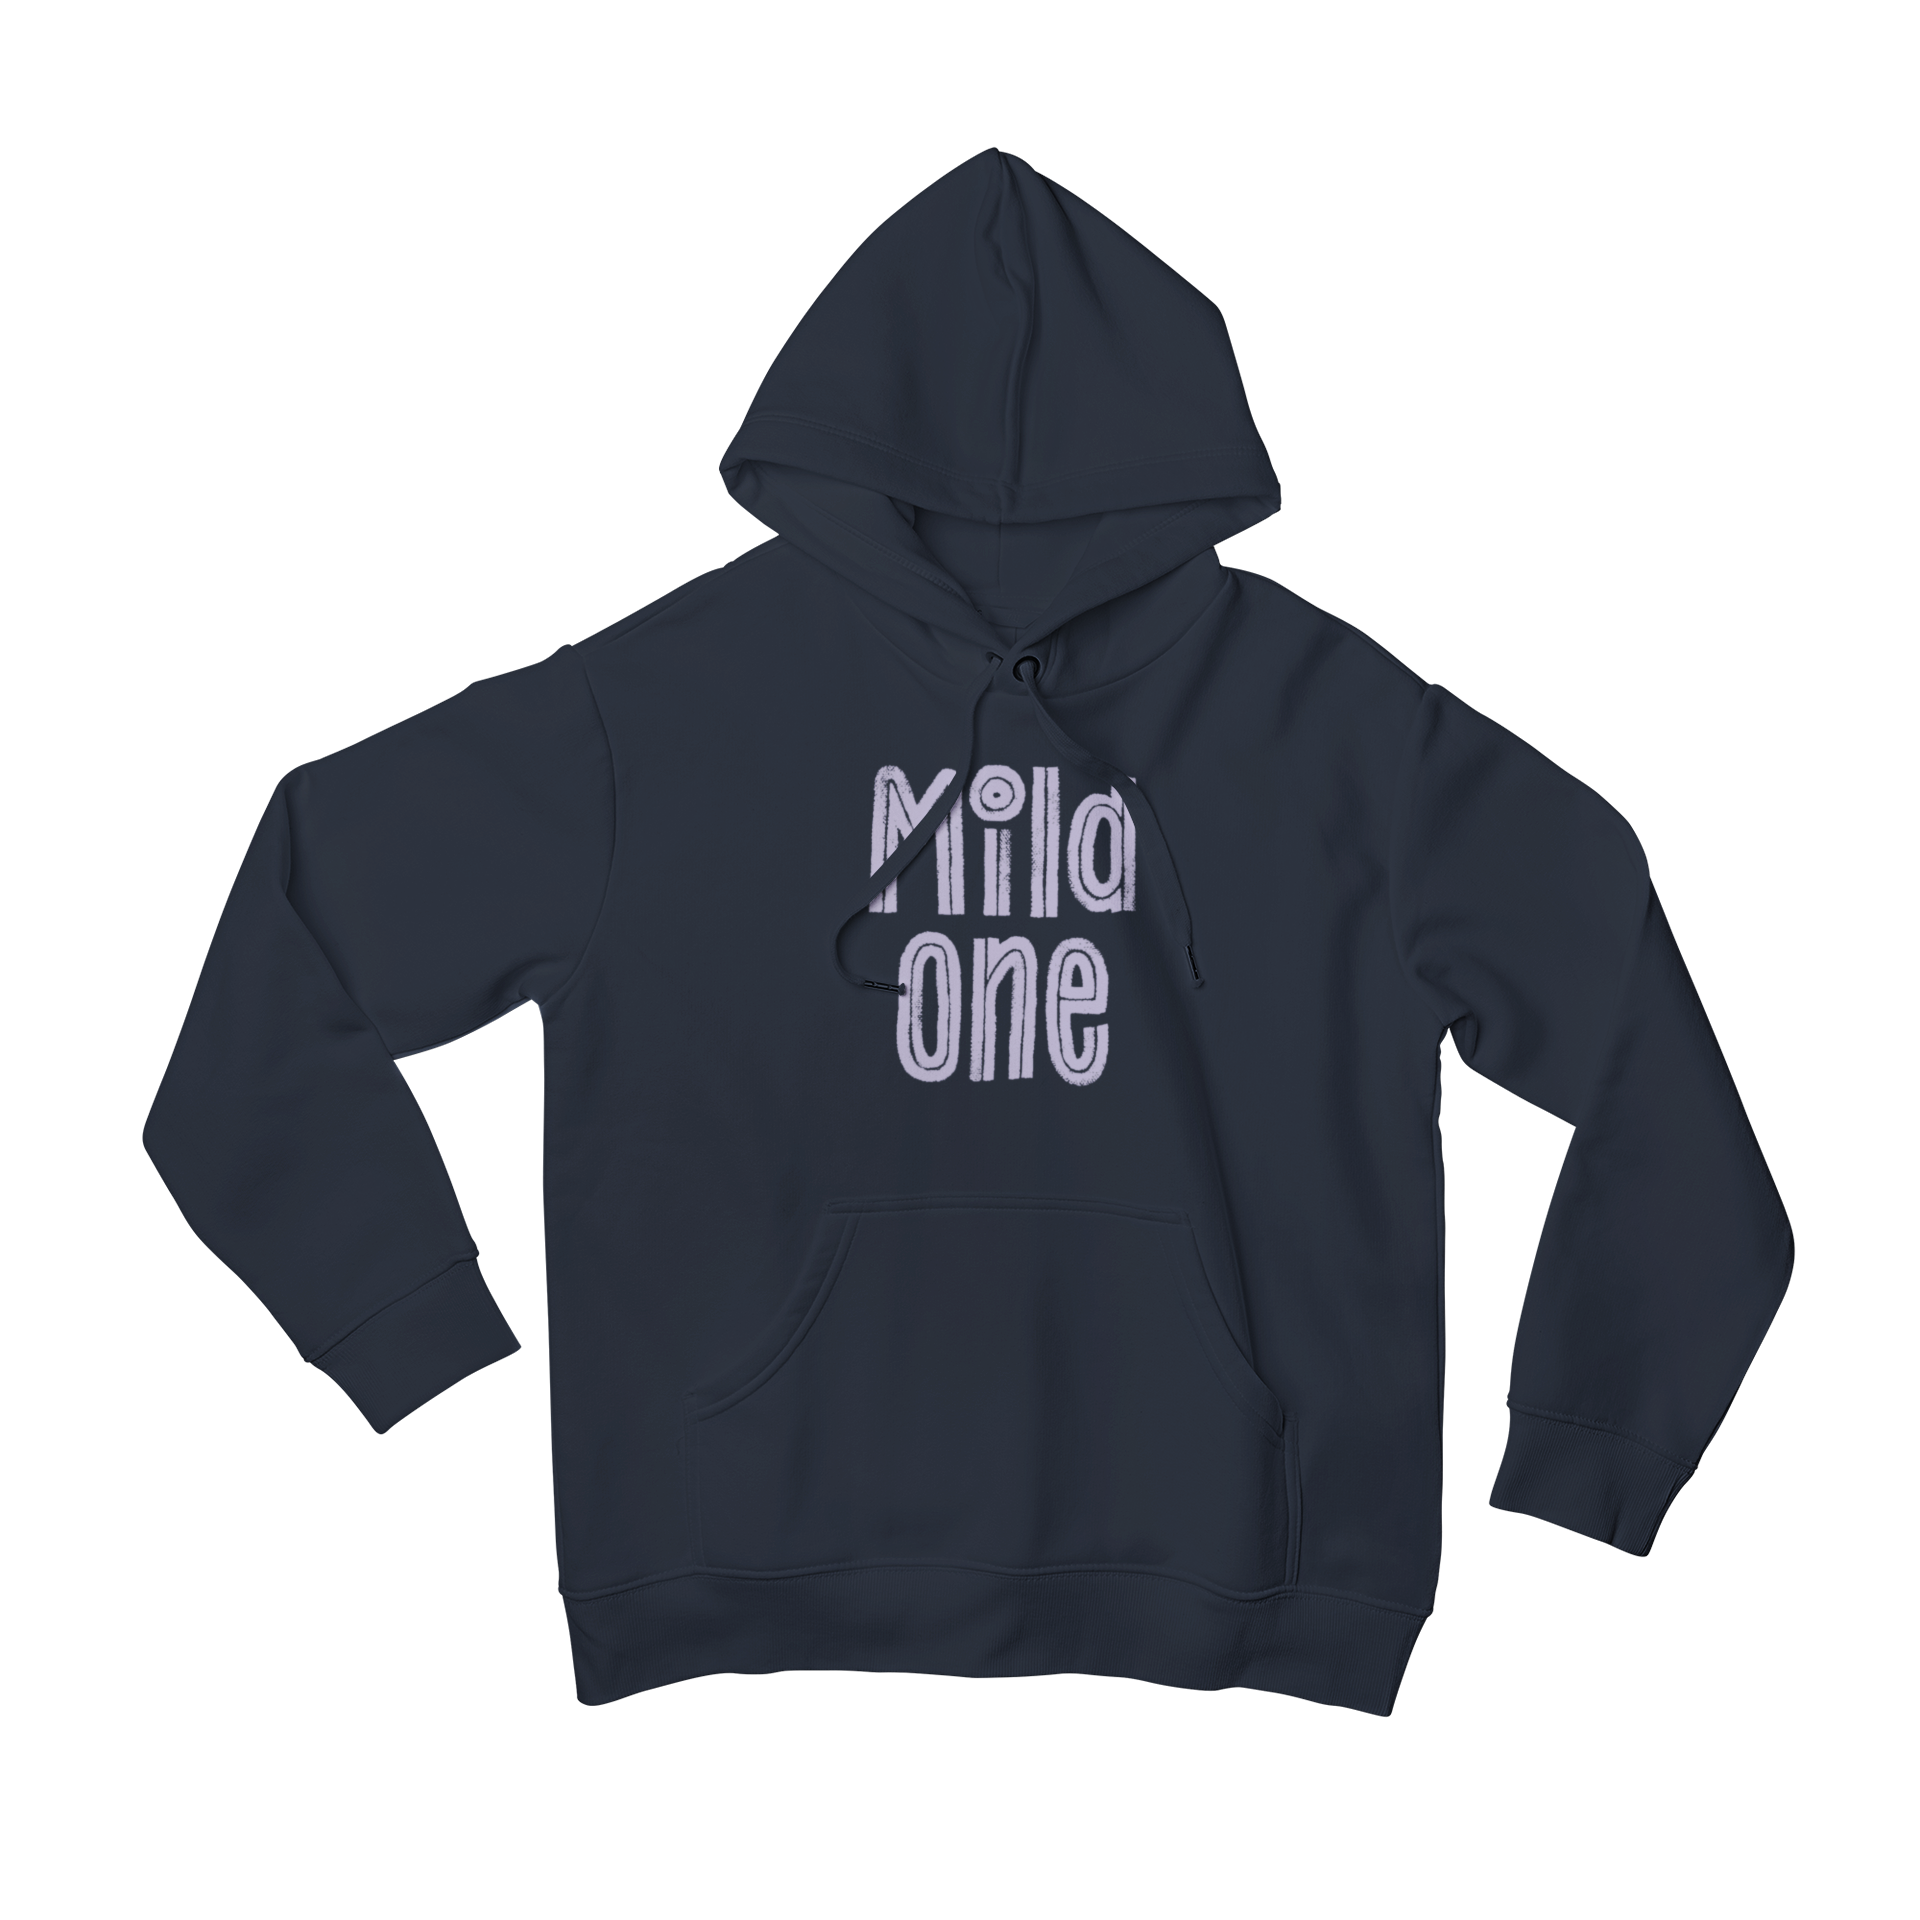 "Mild One" is a must-have for any fashion-forward individual. This matching slogan hoodie is the perfect complement to our "Wild One" hoodie, creating a stylish and cohesive look. Show off your unique style and make a statement with "Mild One."